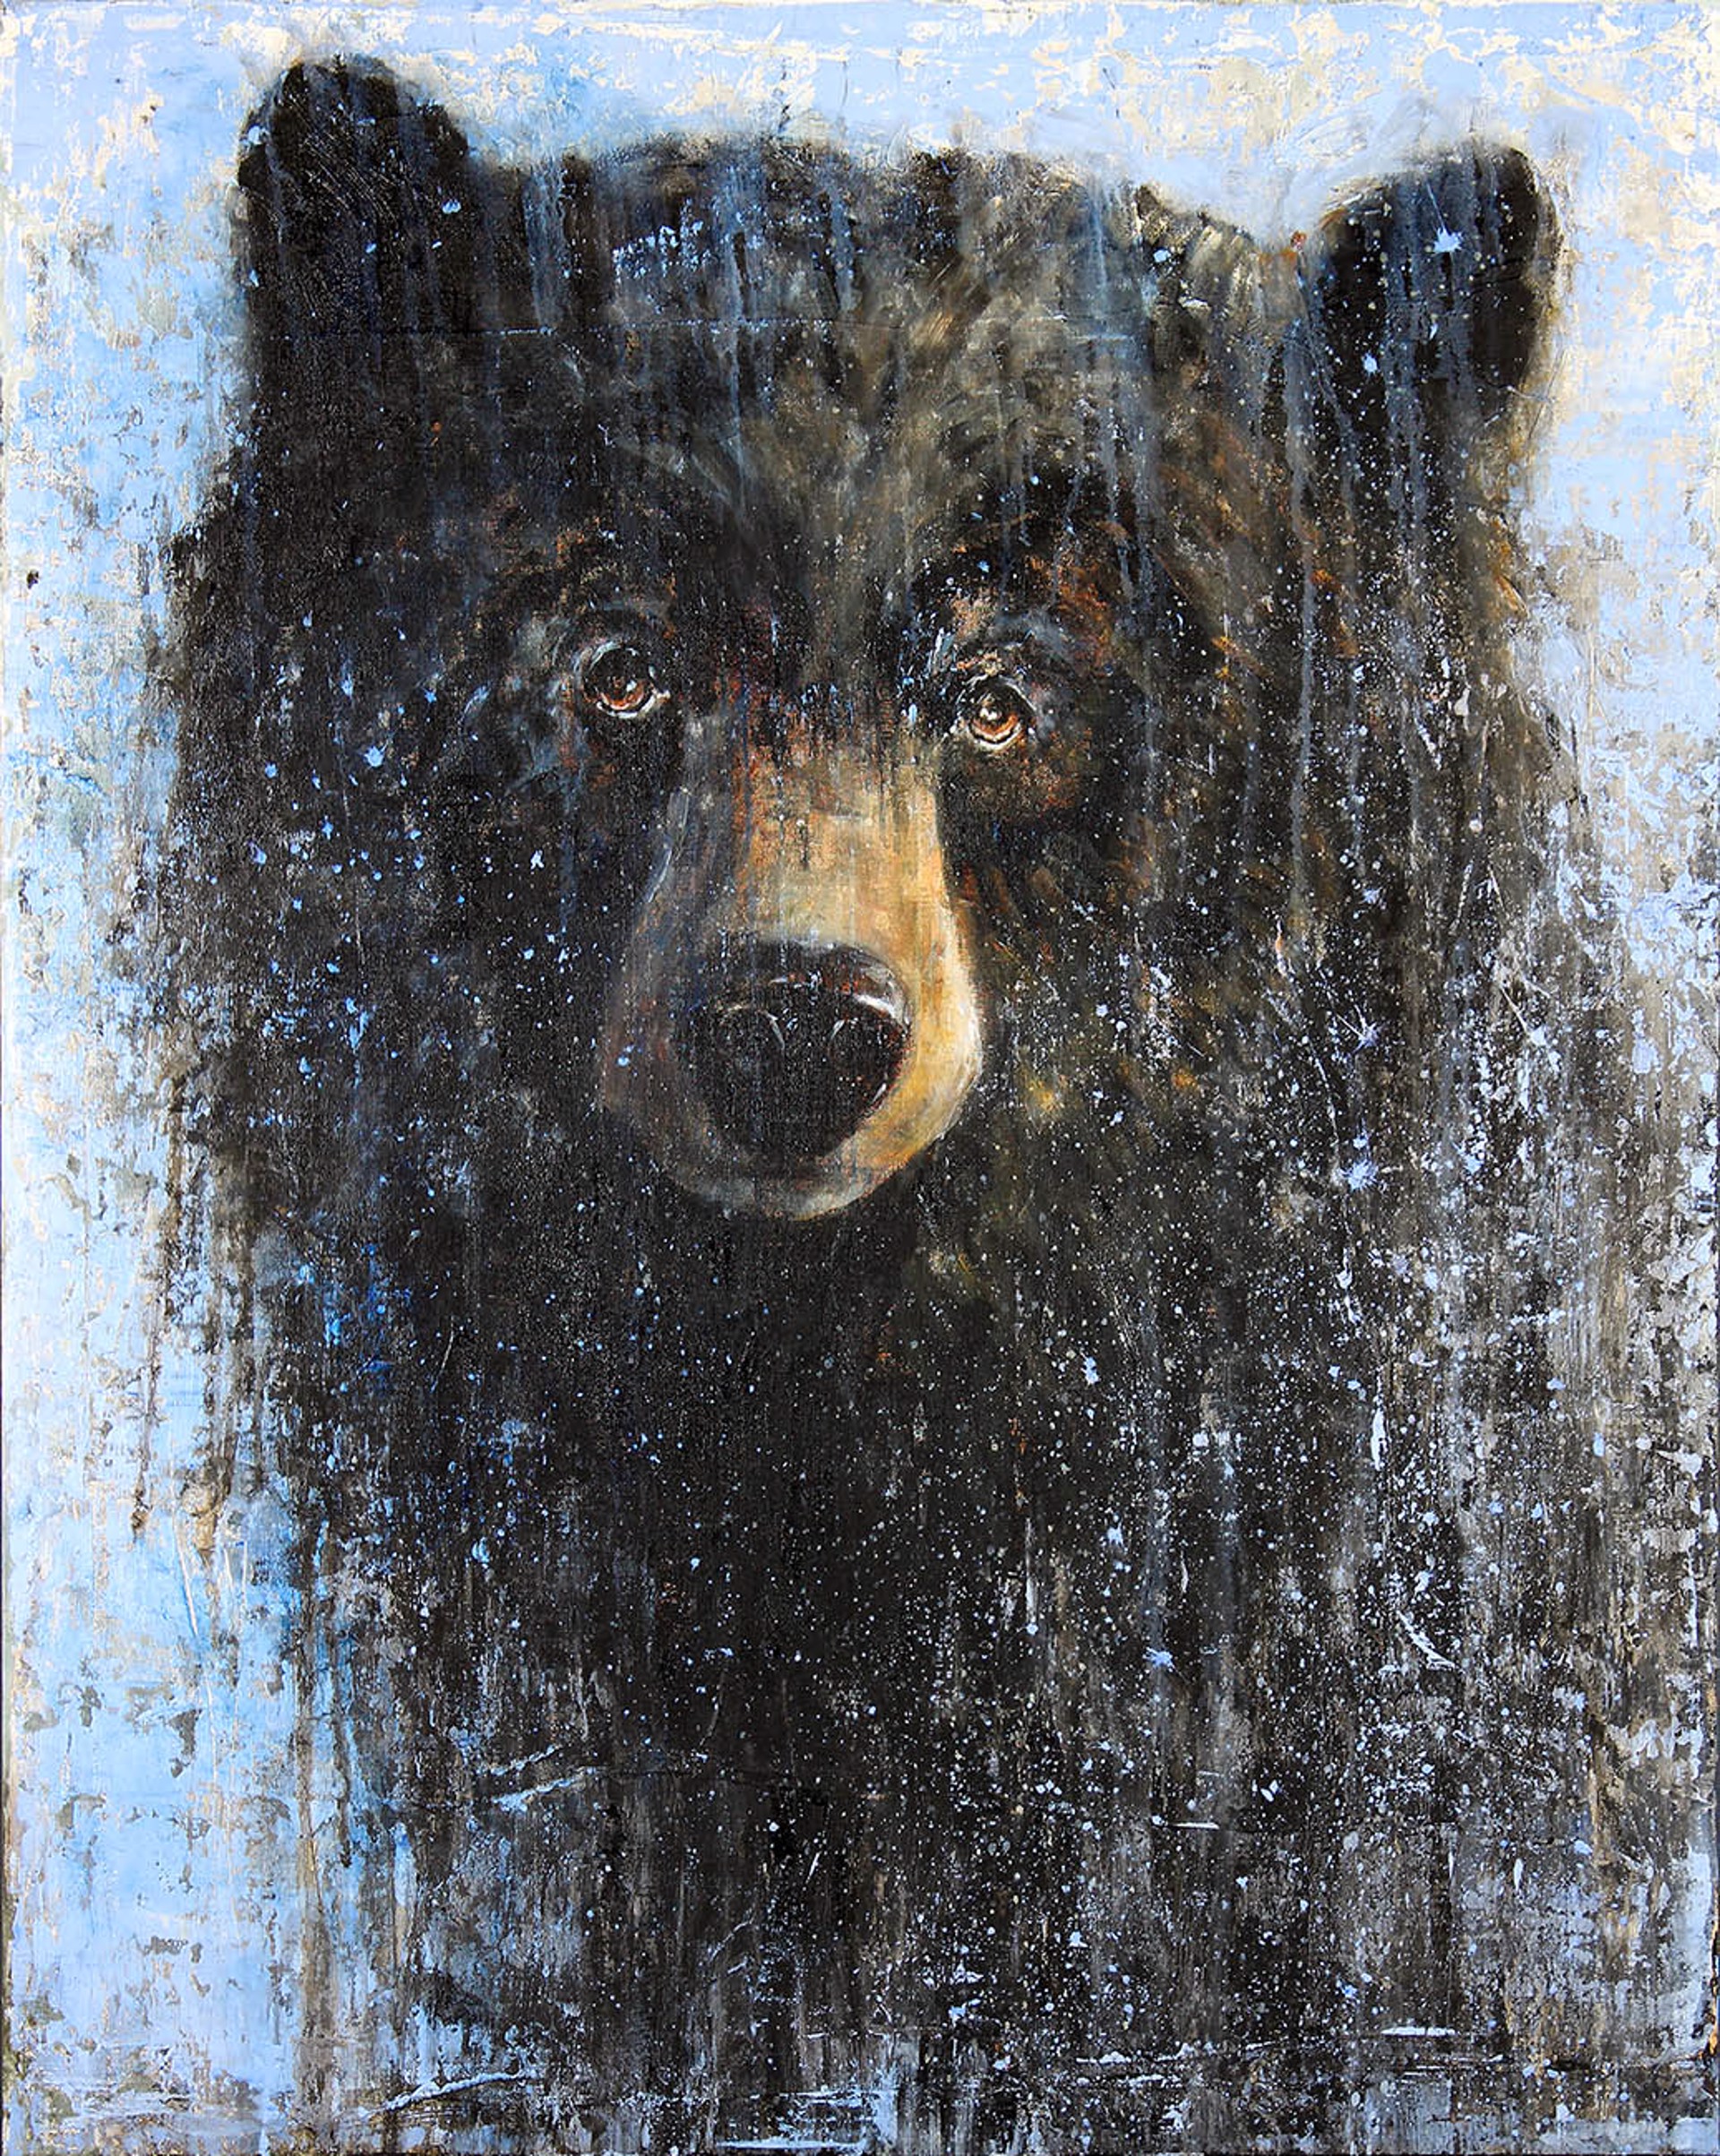 A Contemporary Painting Of A Black Bear With A Blue Abstract Background By Matt Flint At Gallery Wild